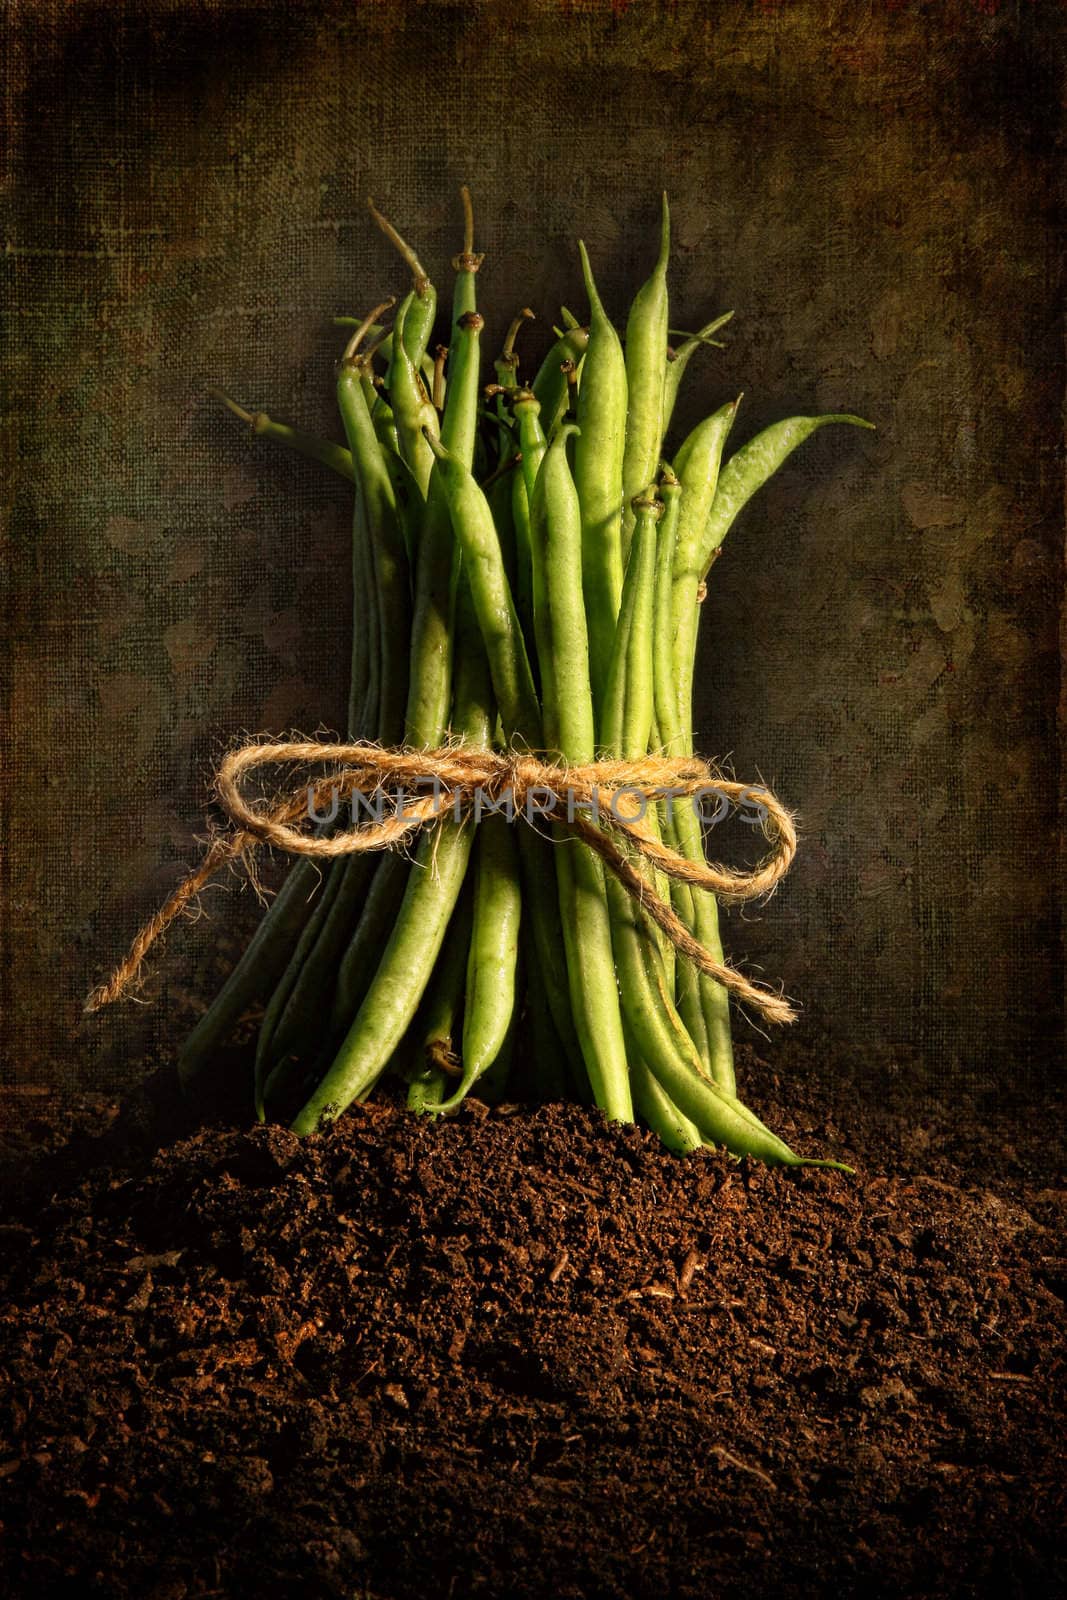 Fresh green beans tied  with cord against grunge background